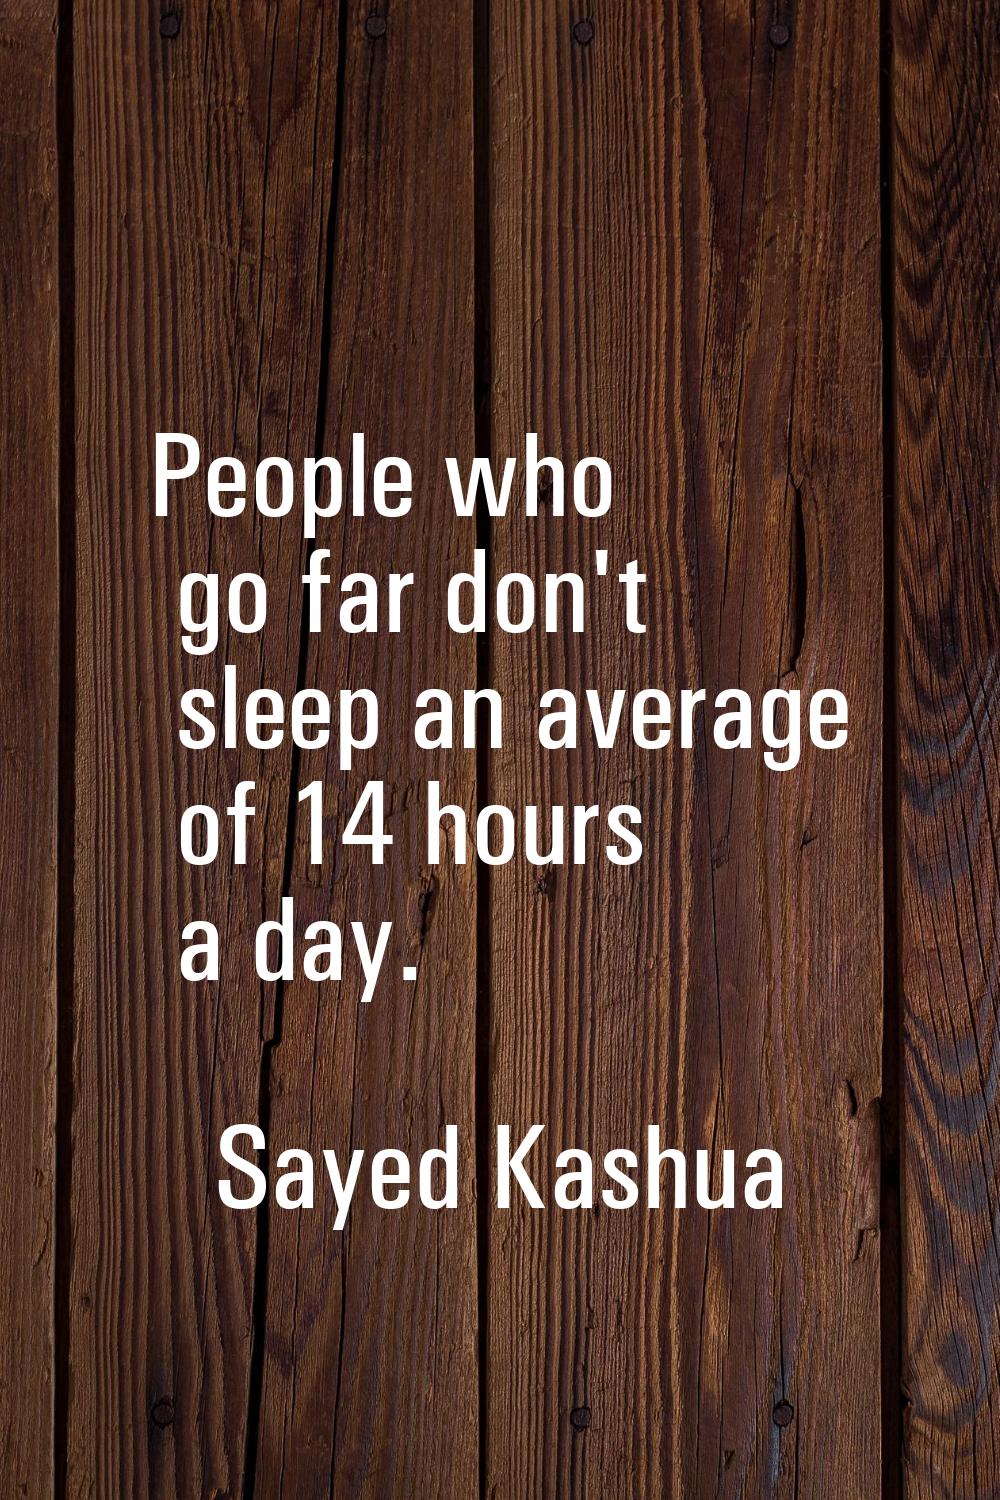 People who go far don't sleep an average of 14 hours a day.